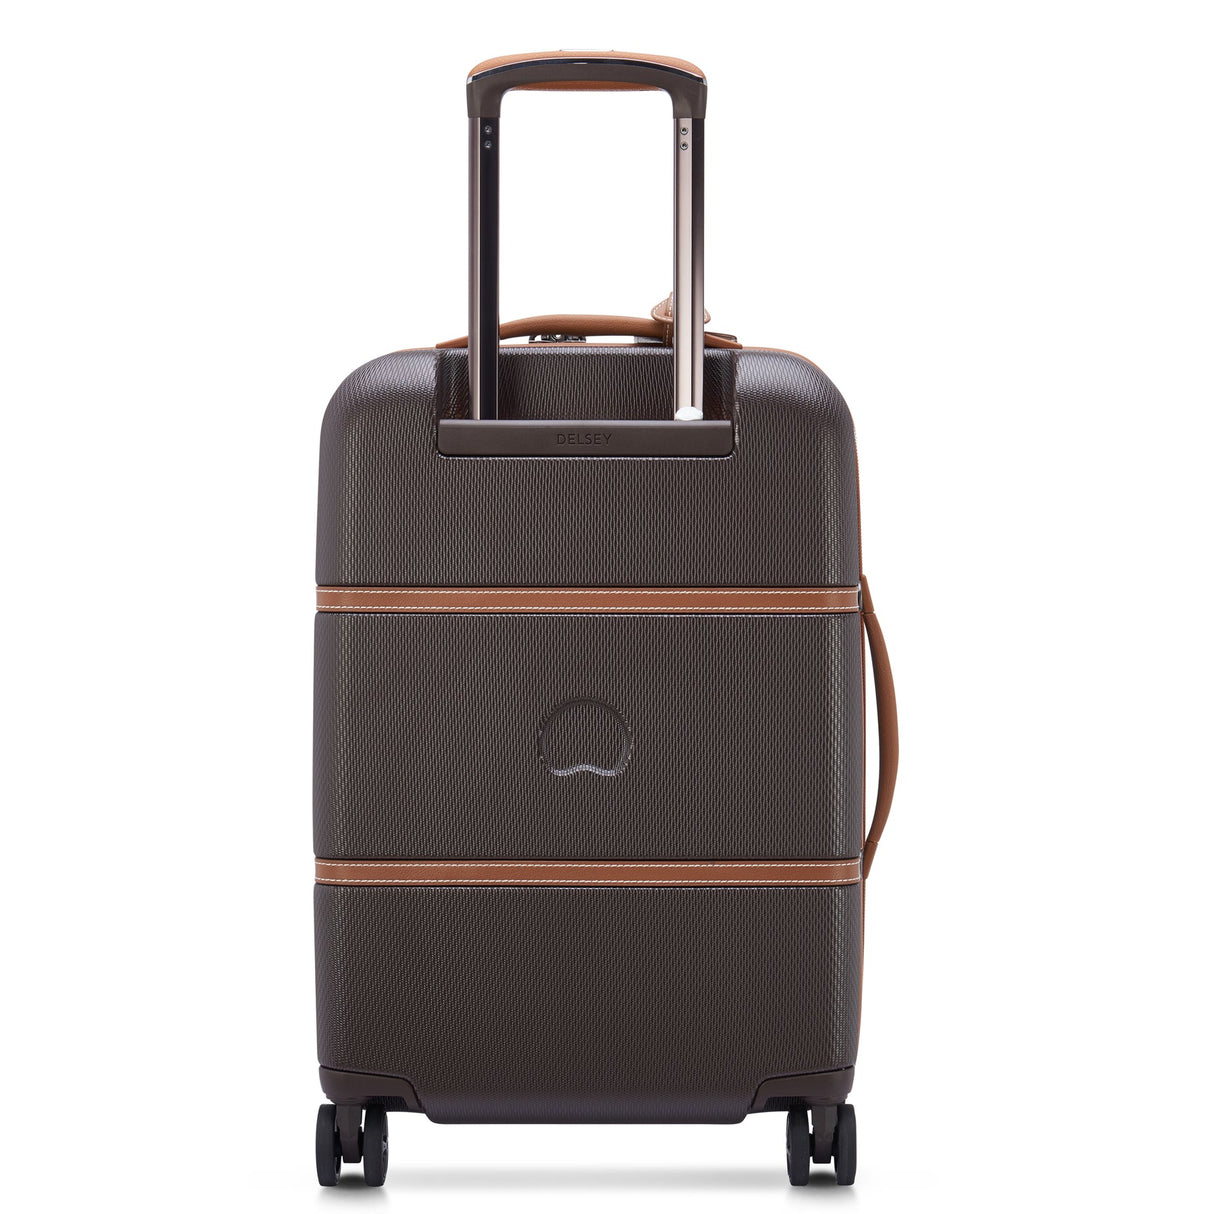 Delsey Chatelet Air 2.0 Carry-On Spinner , , delsey-chatelet-air-2.0-40167680506-12_1800x1800_654ee9b9-5b4e-47bd-a6a8-257e4c463dea